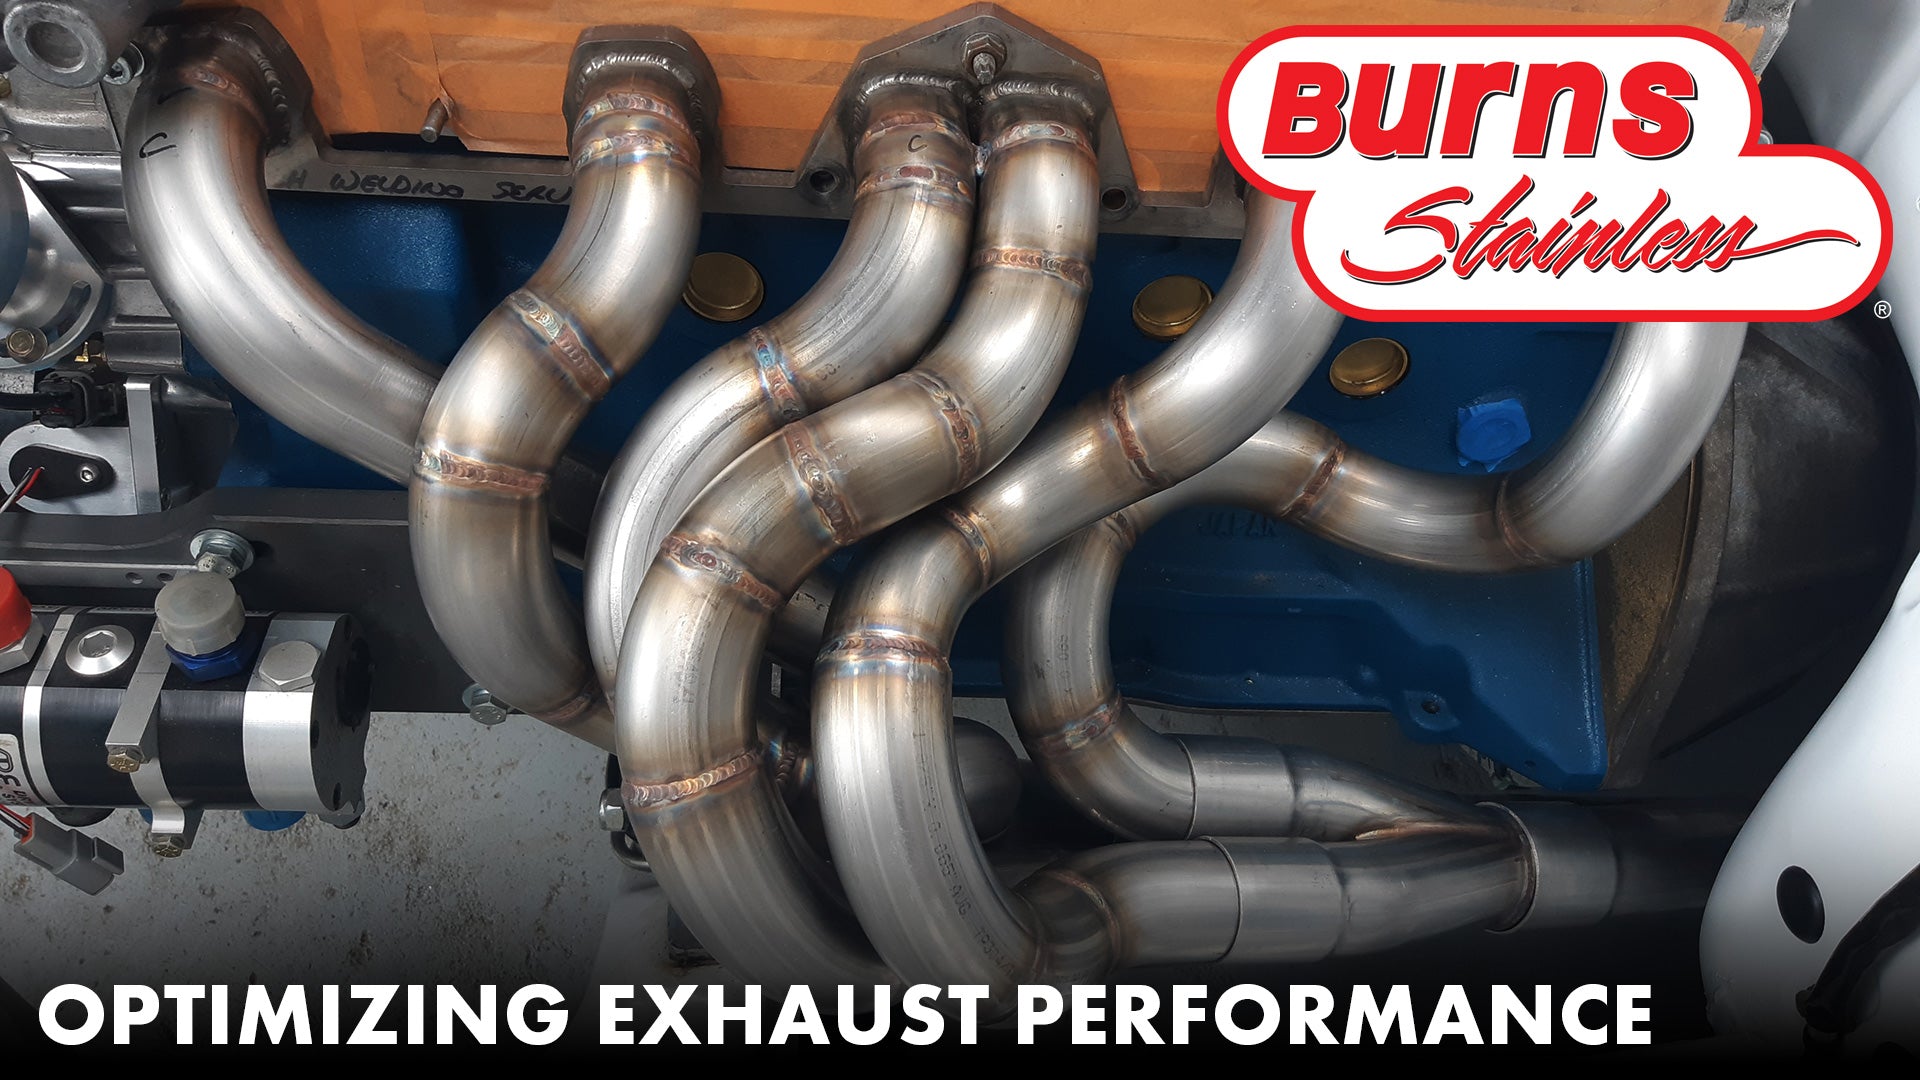 The Optimization of Exhaust Performance